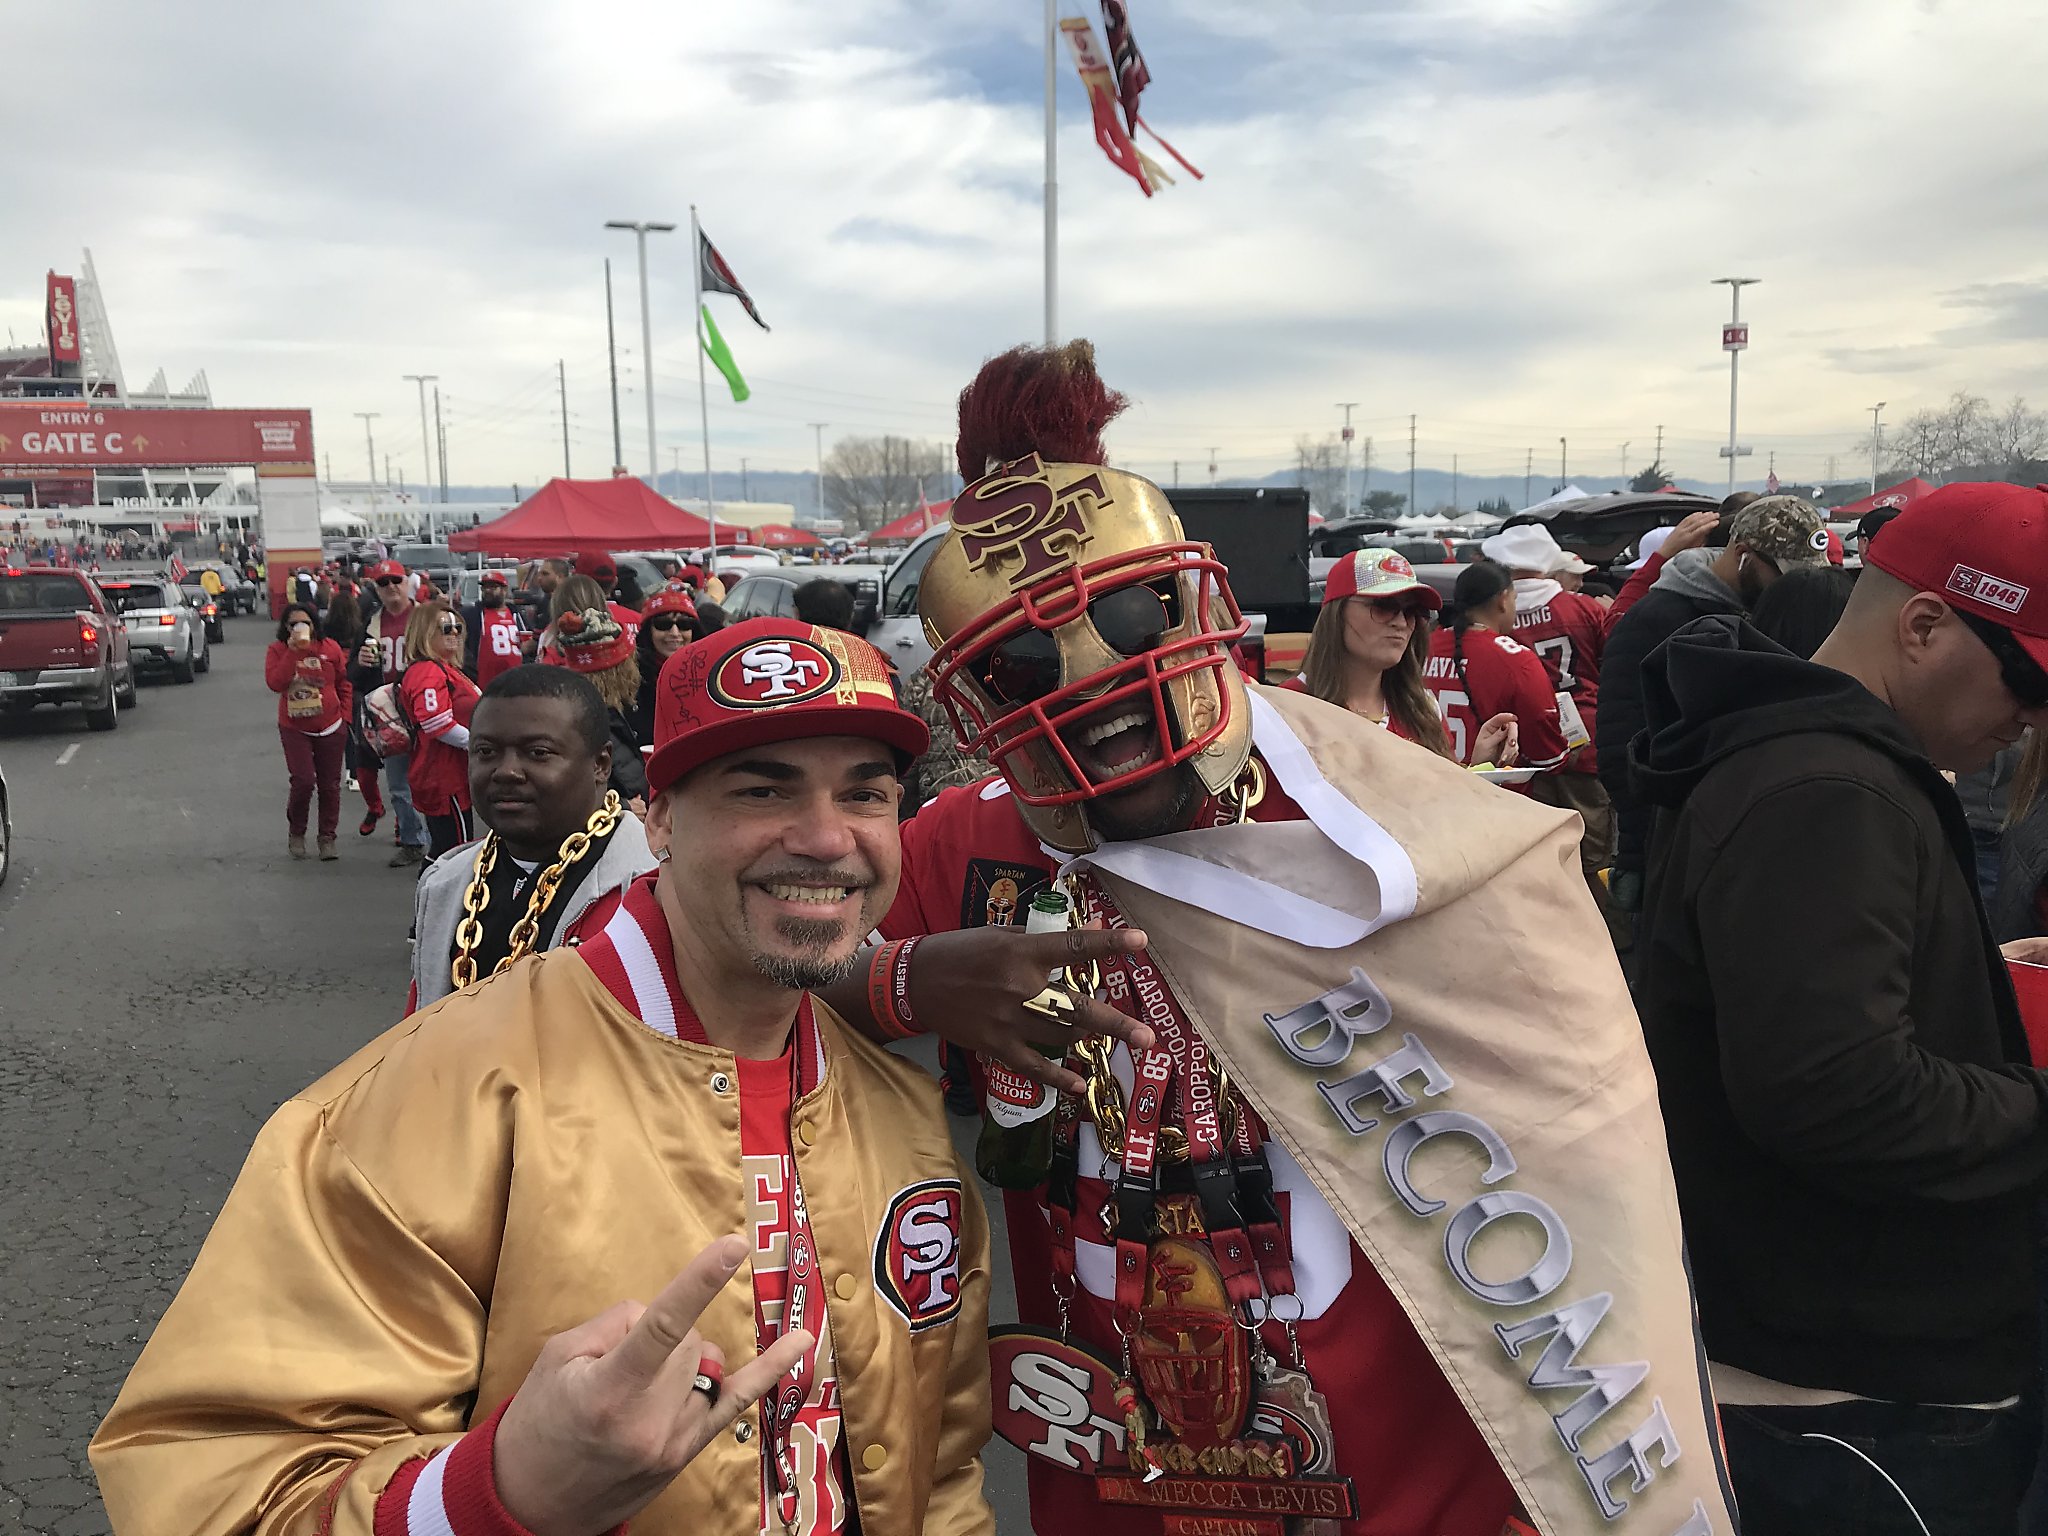 49ers tailgate scene raging at Levi's Stadium ahead of Championship Game  against Packers